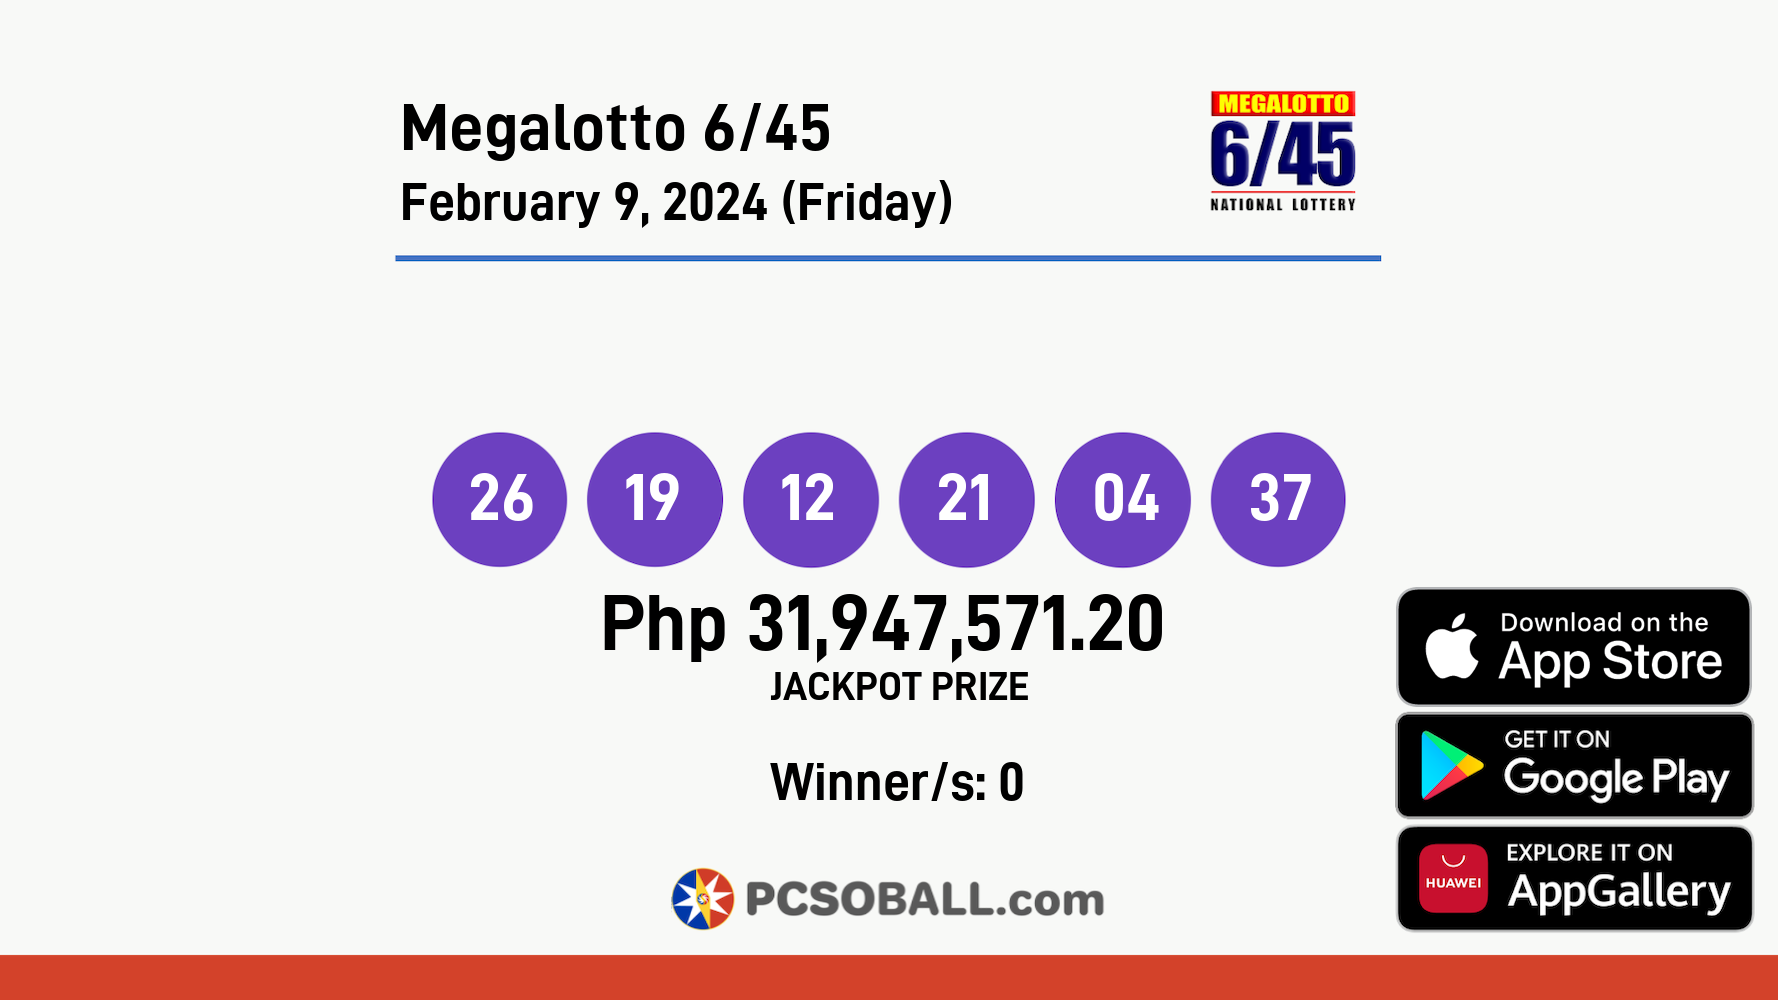 Megalotto 6/45 February 9, 2024 (Friday) Result